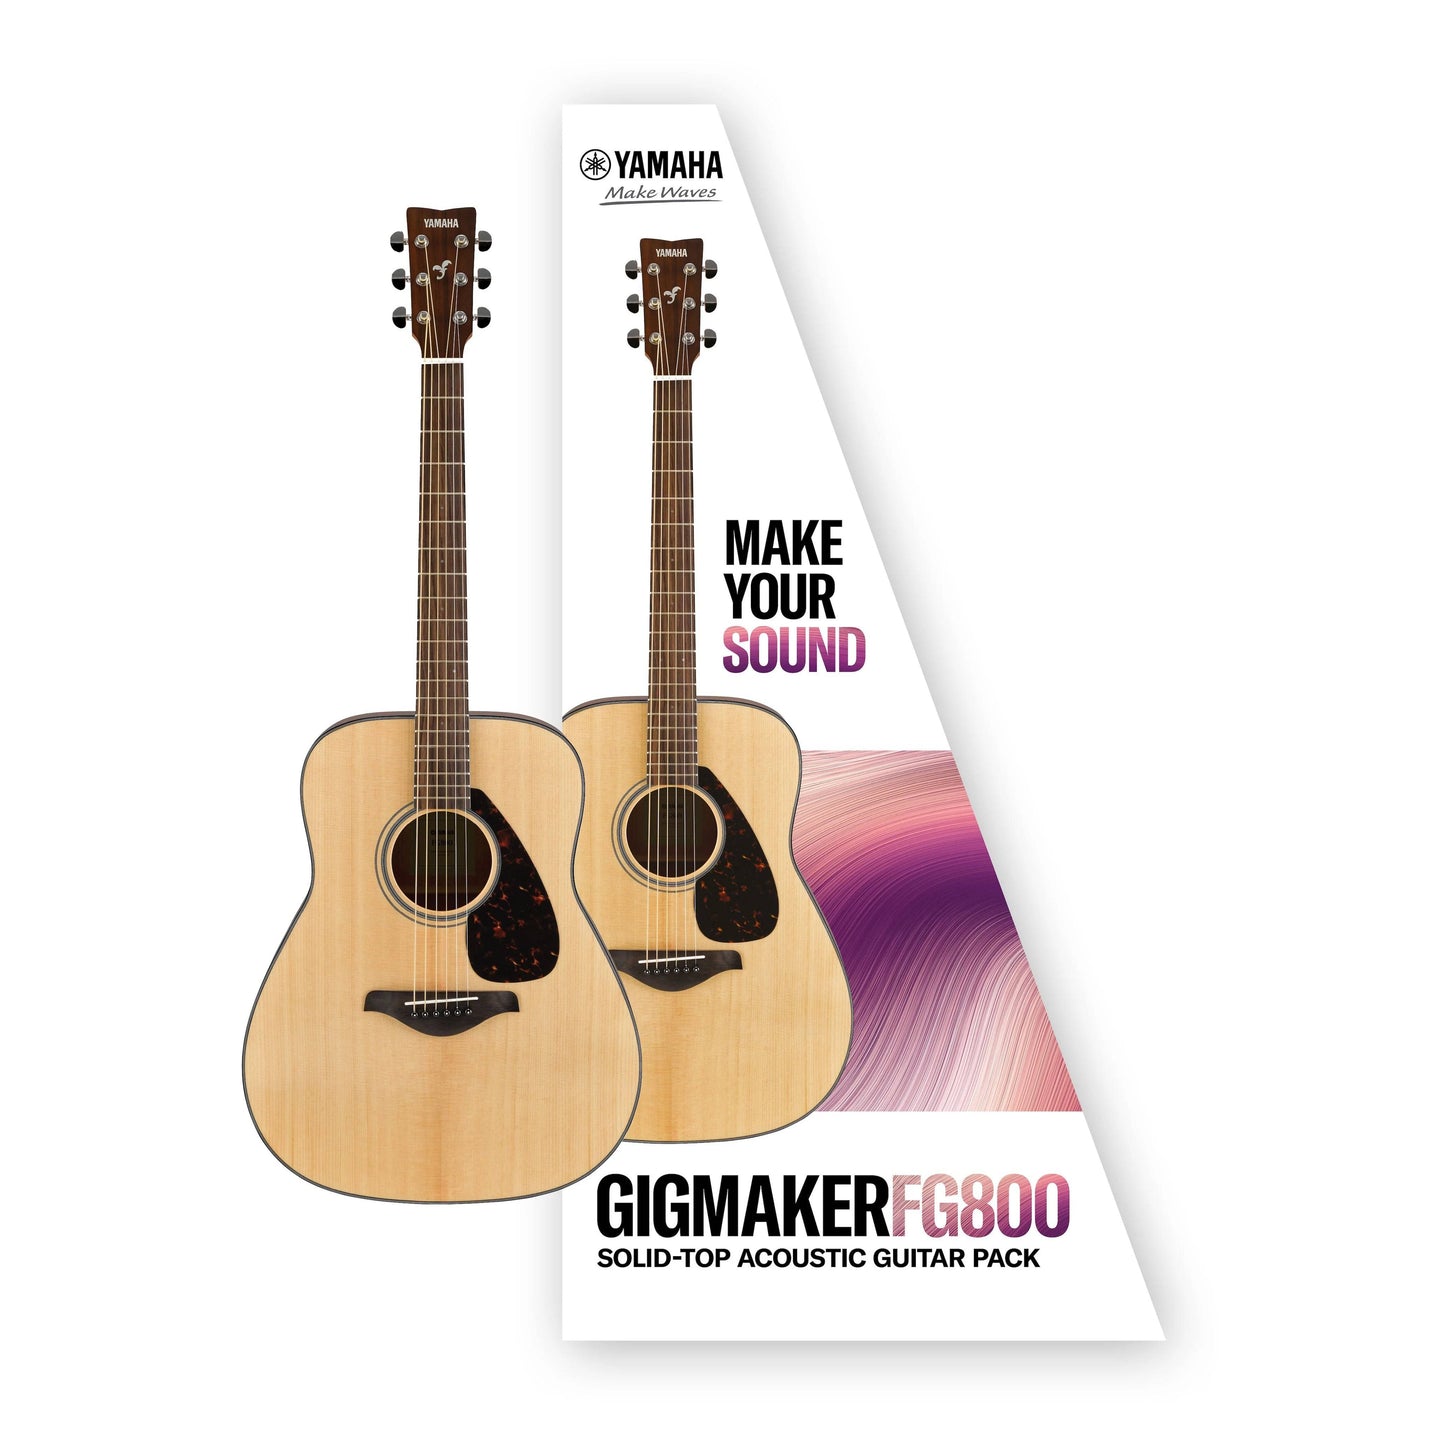 Yamaha Gigmaker FG800 Acoustic Guitar Pack - Joondalup Music Centre